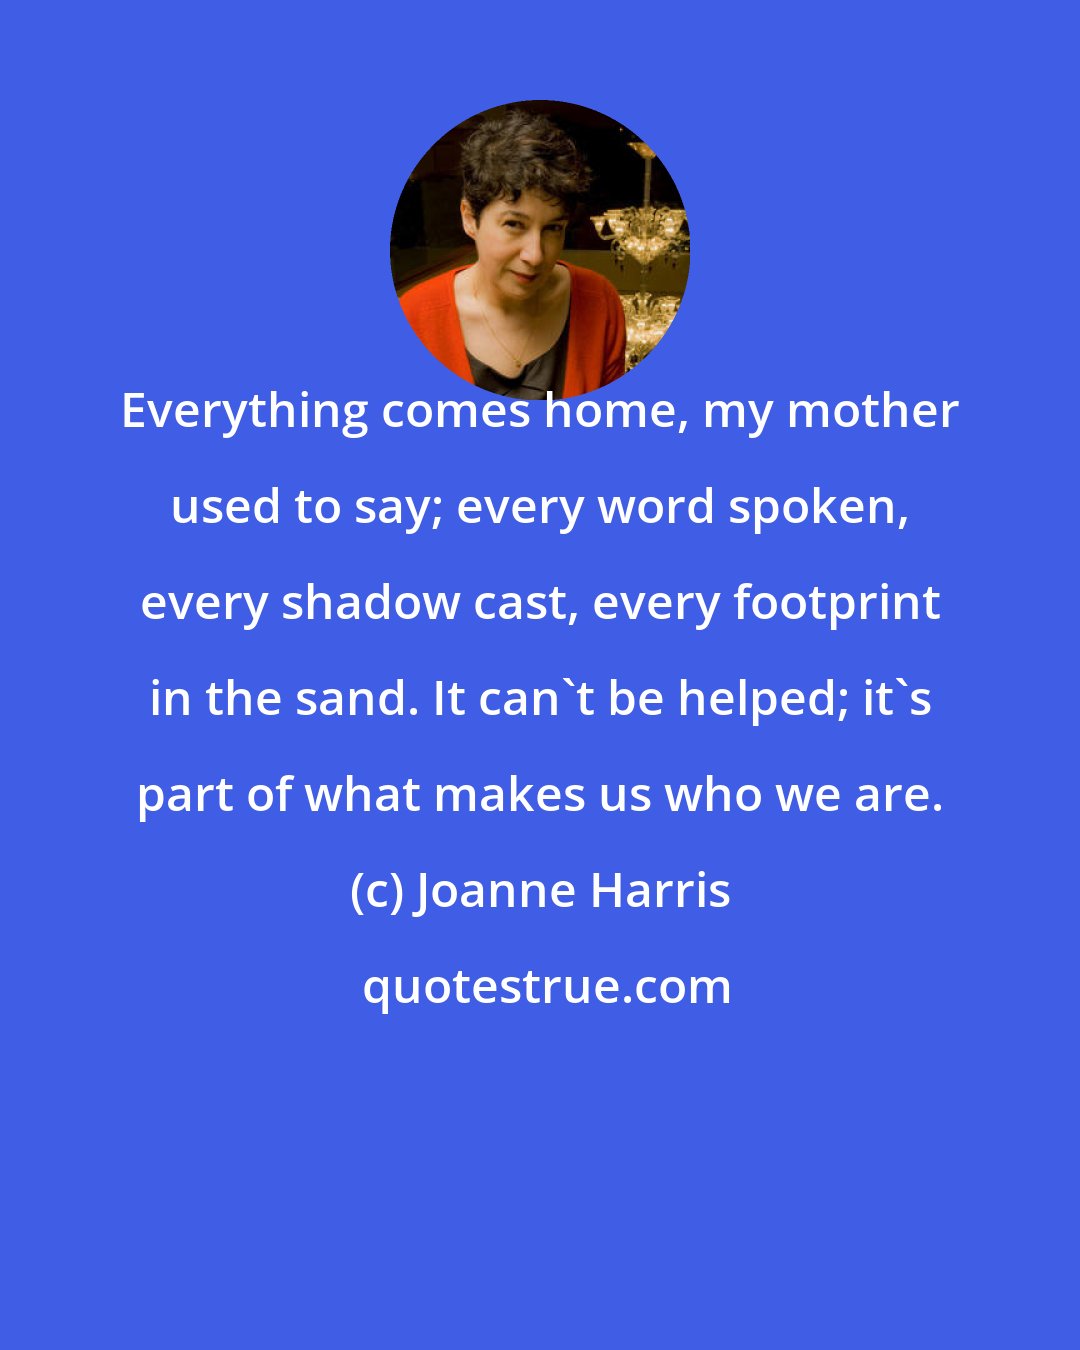 Joanne Harris: Everything comes home, my mother used to say; every word spoken, every shadow cast, every footprint in the sand. It can't be helped; it's part of what makes us who we are.